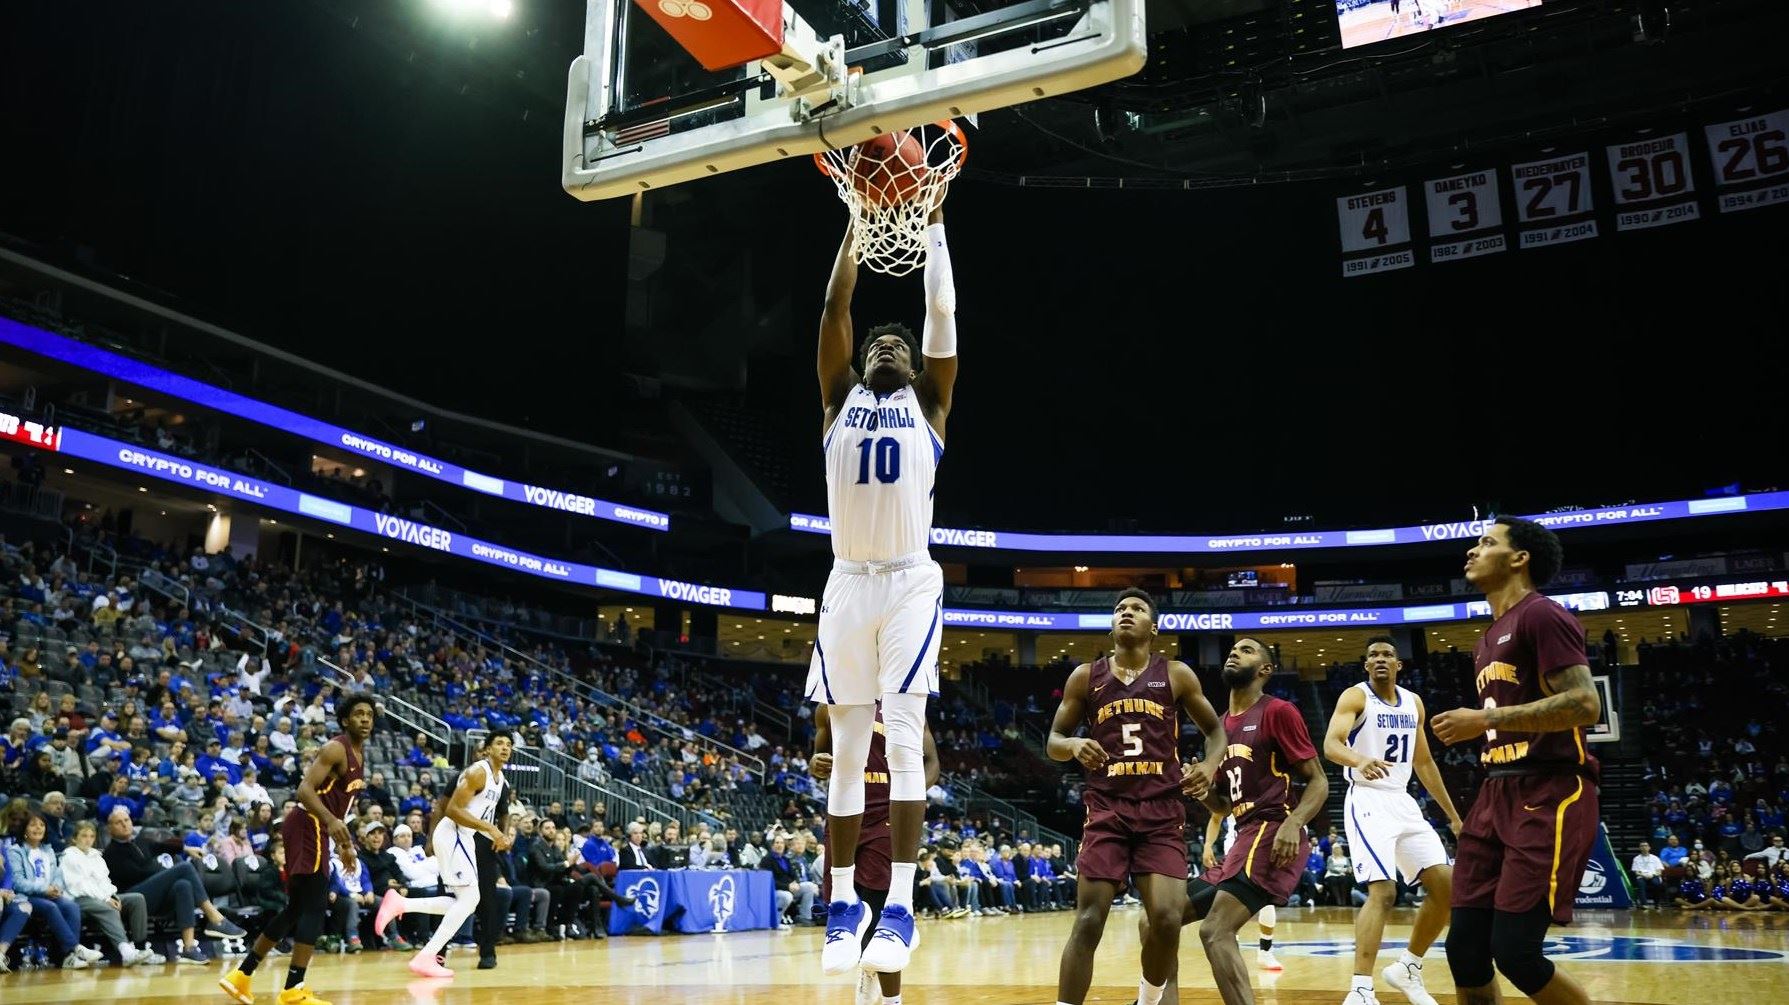 Seton Hall's Alexis Yetna attempts a dunk during a home game against Bethune-Cookman.